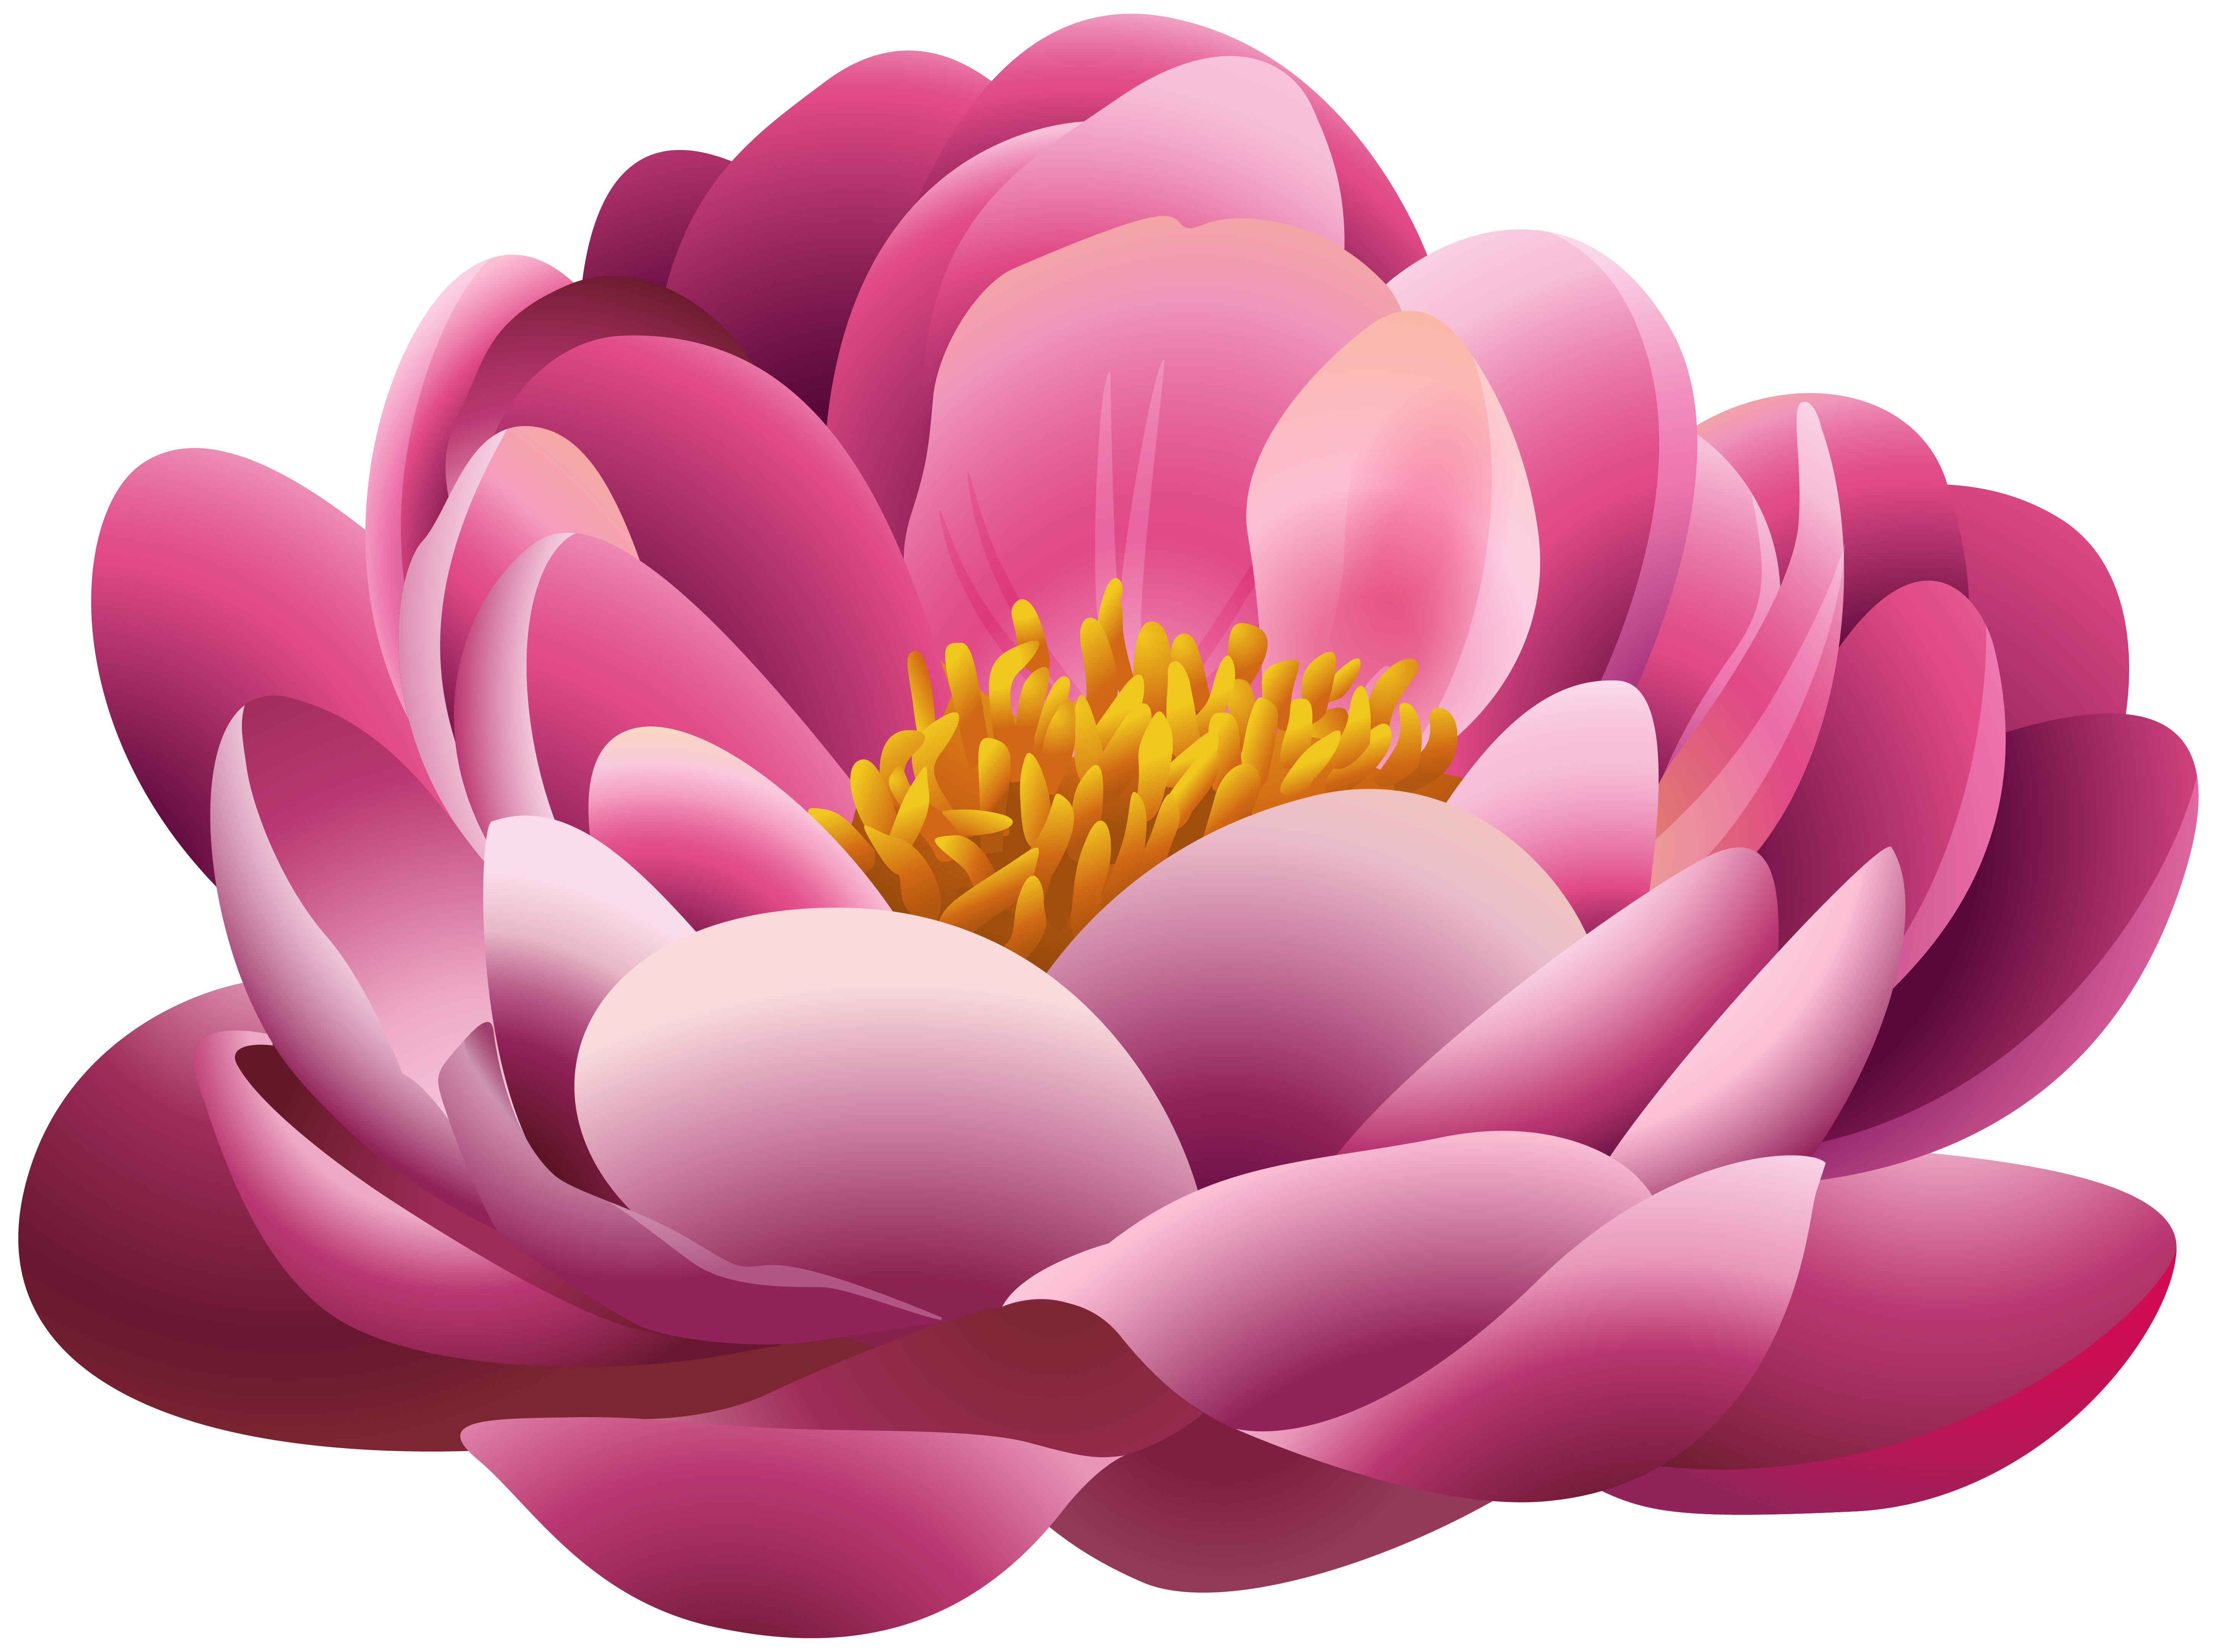 Pink png image gallery. Beautiful clipart flower